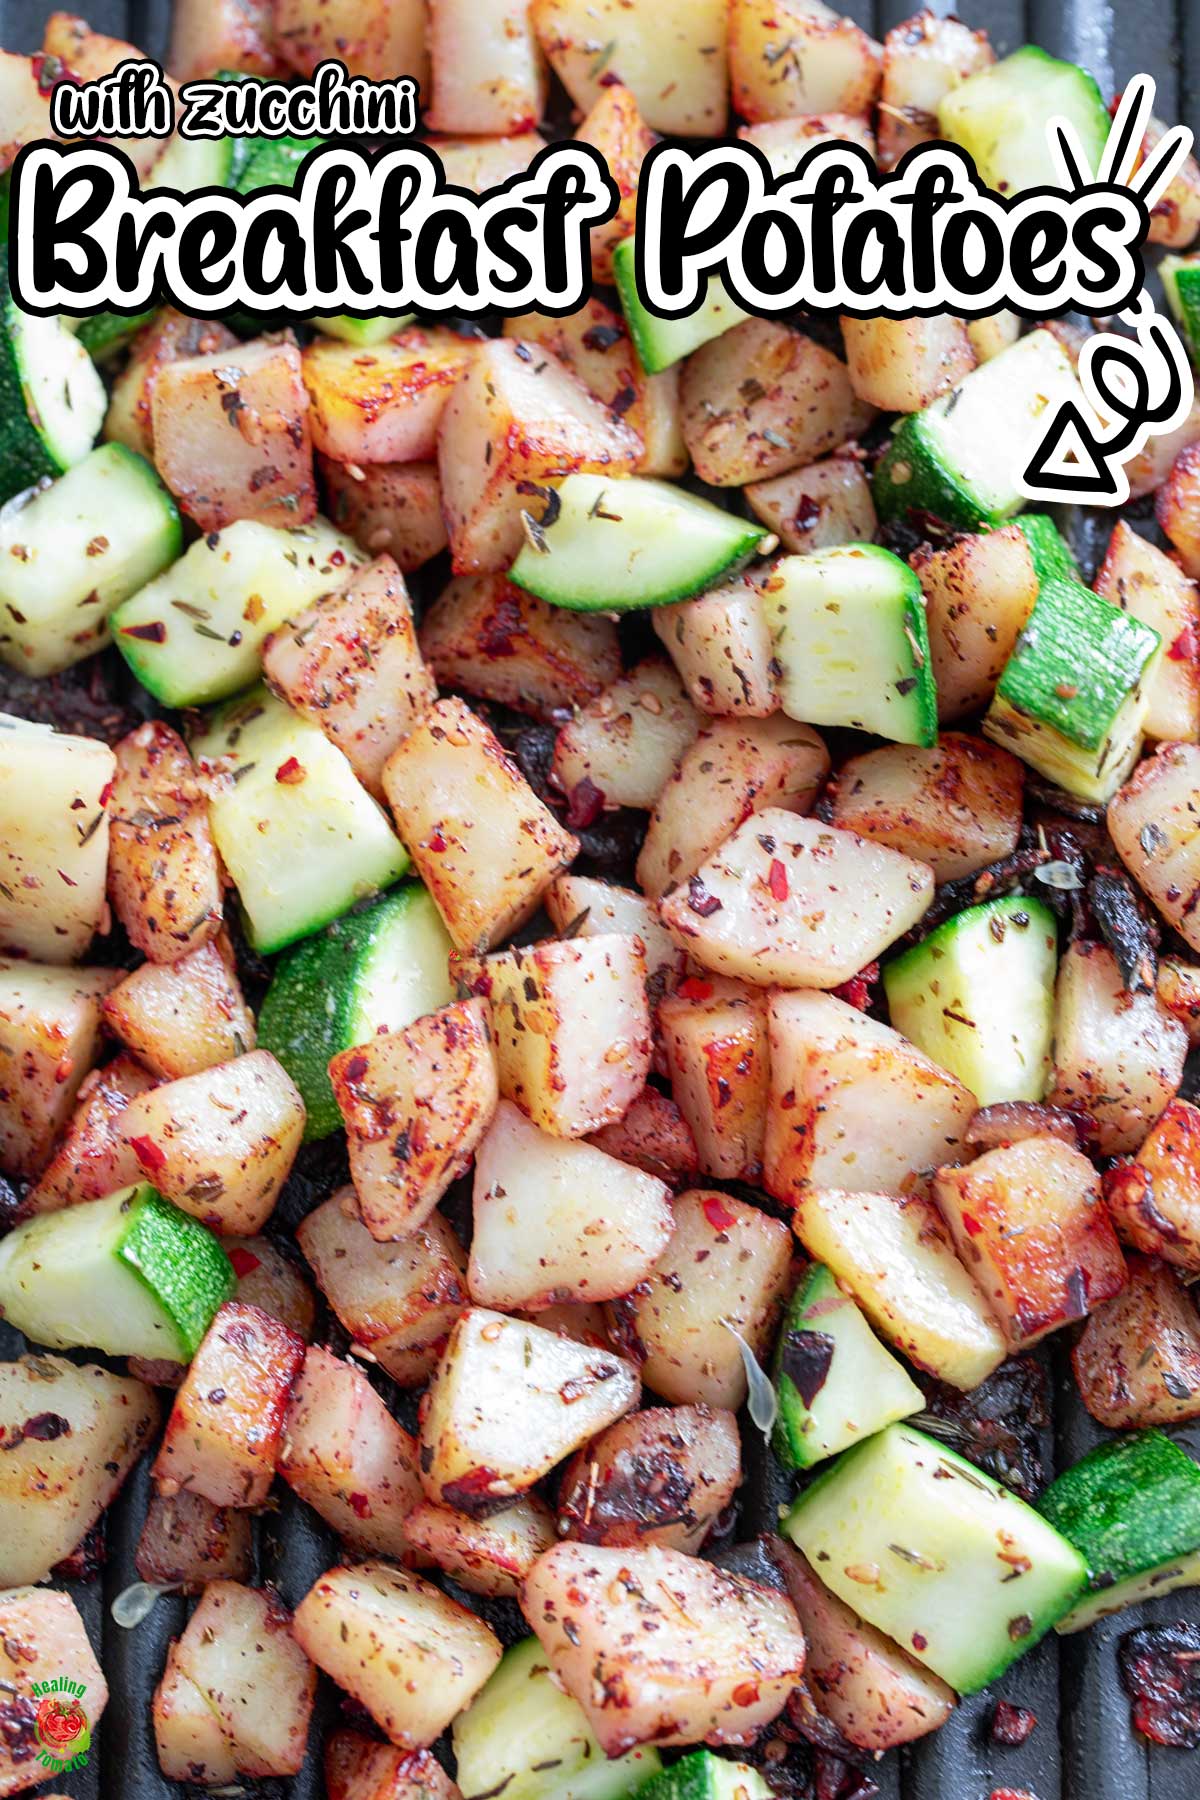 Closeup view of breakfast potatoes with zucchini in a stove top grill